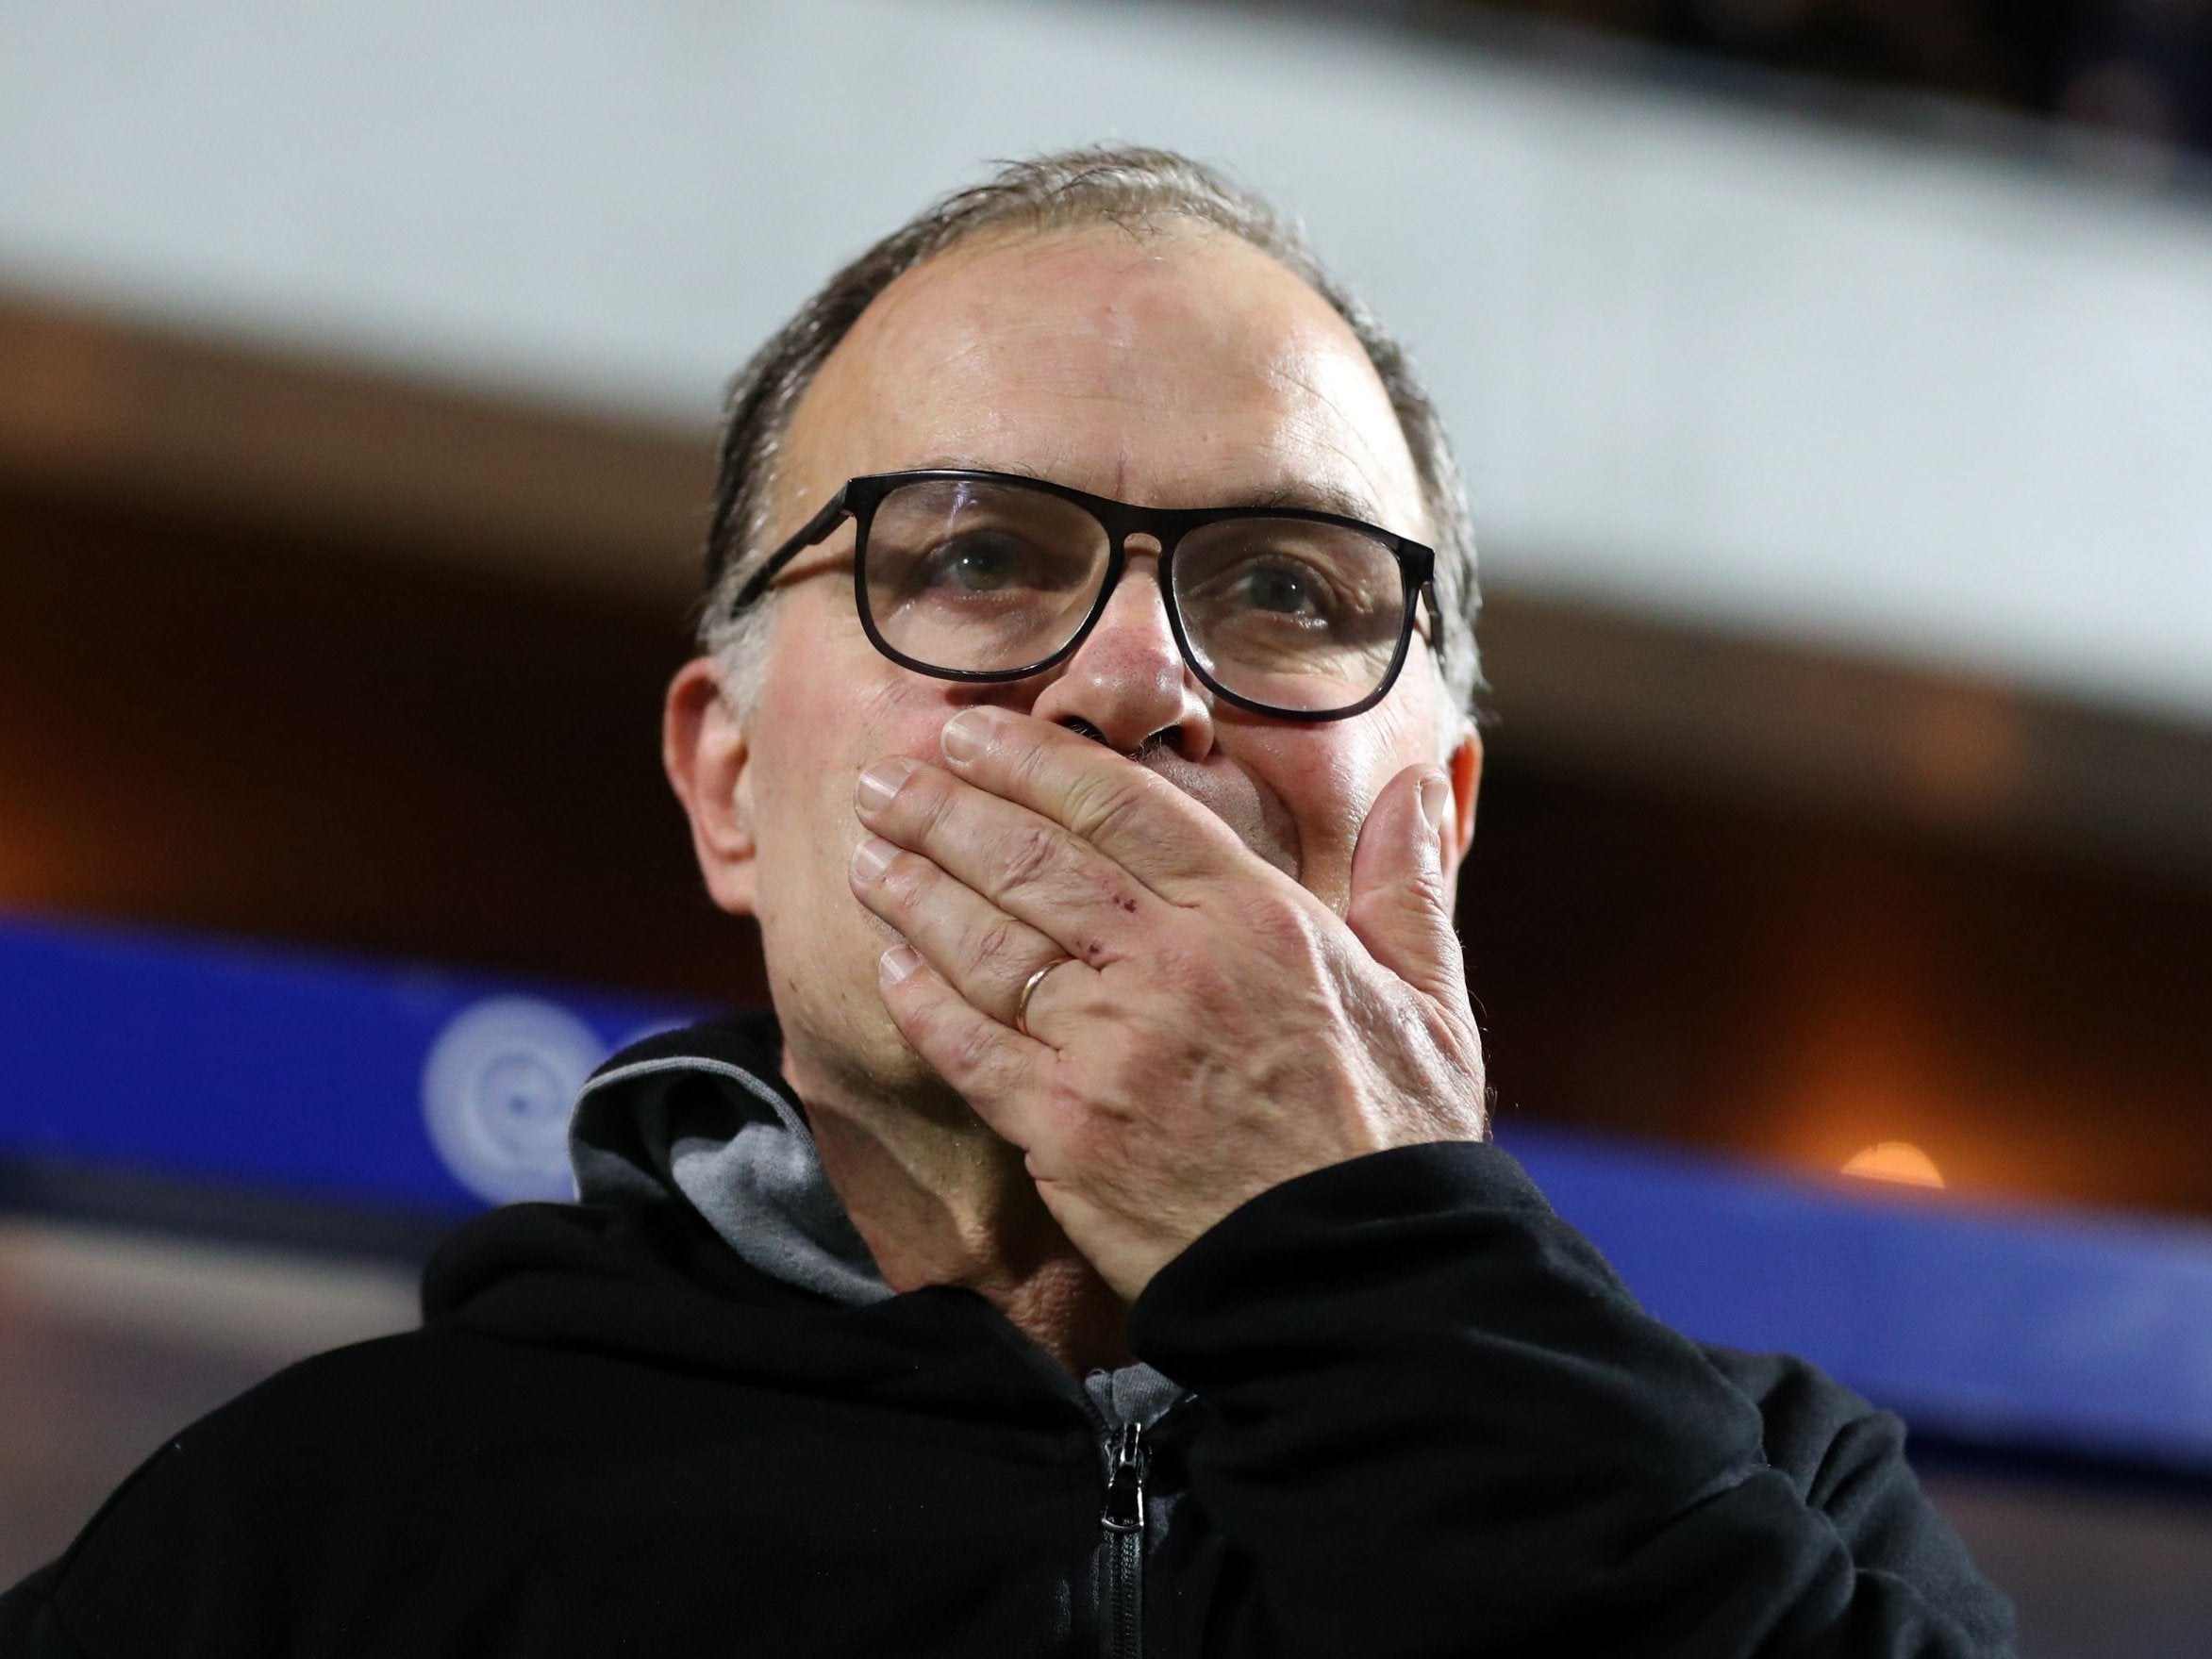 Bielsa was not pleased after seeing his side drop yet more points in the race for promotion